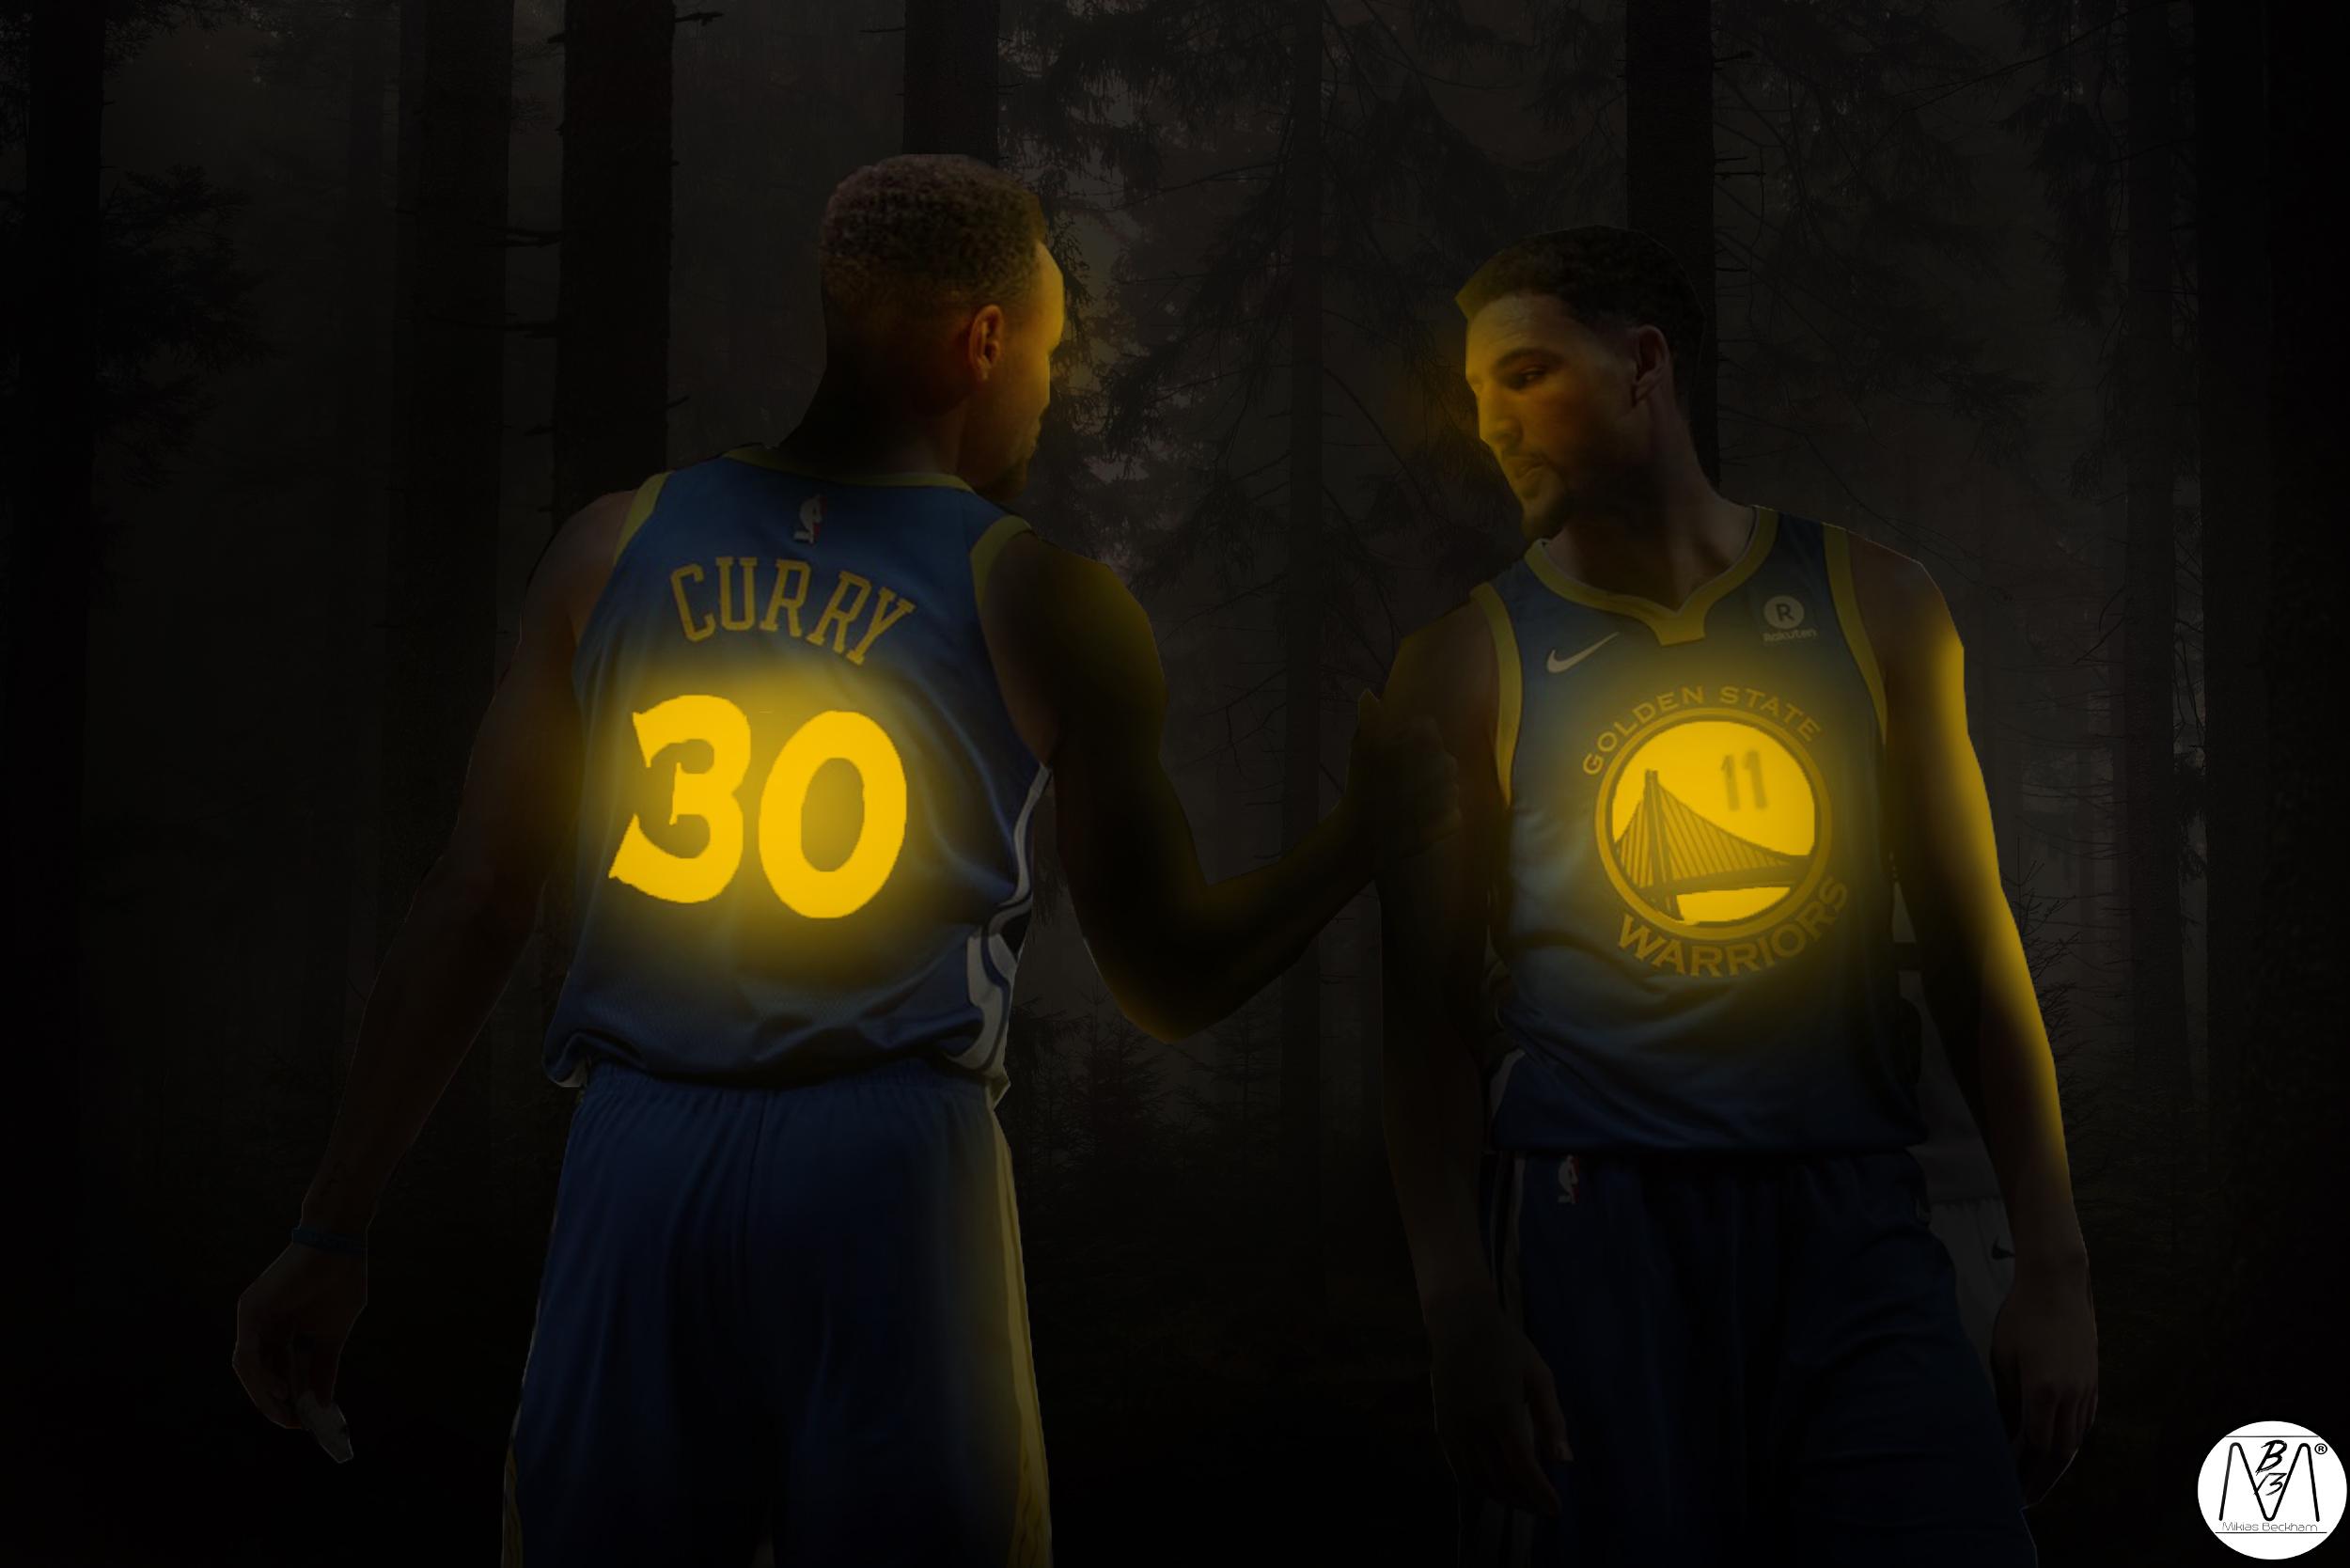 Stephen Curry And Klay Thompson Wallpaper By Mikiasb13